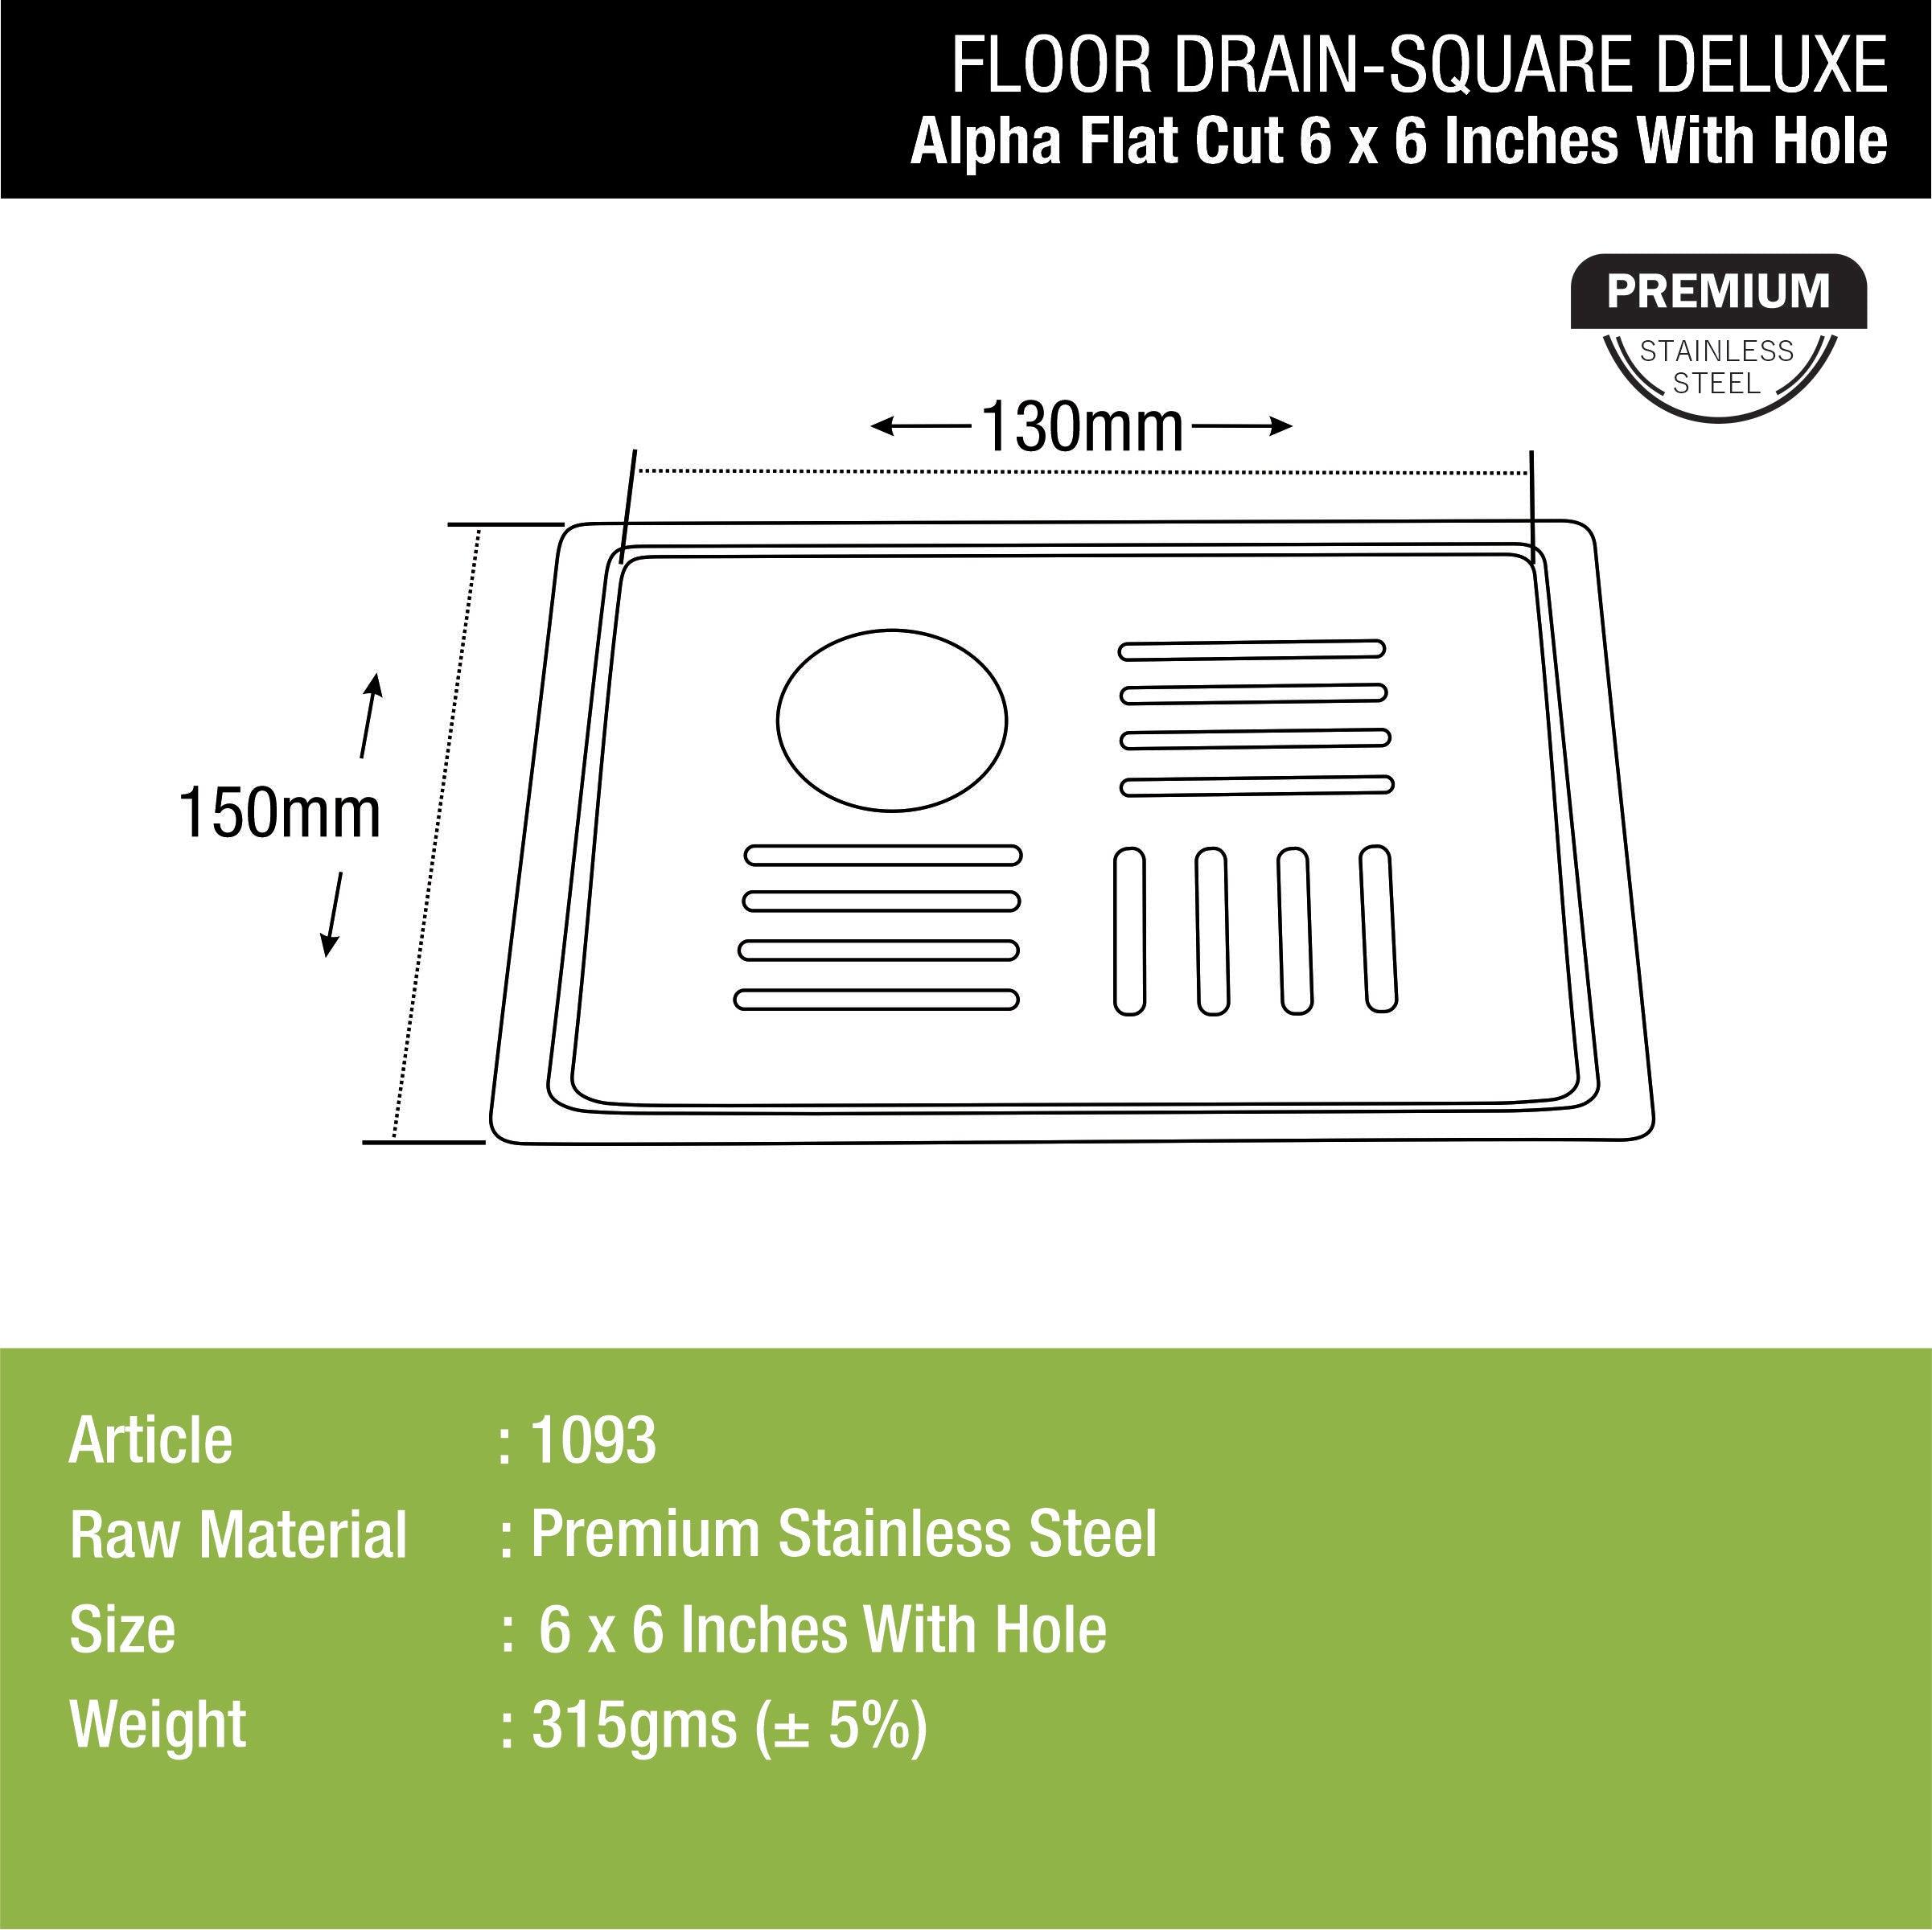 Alpha Deluxe Square Flat Cut Floor Drain (6 x 6 Inches) with Hole dimensions and sizes